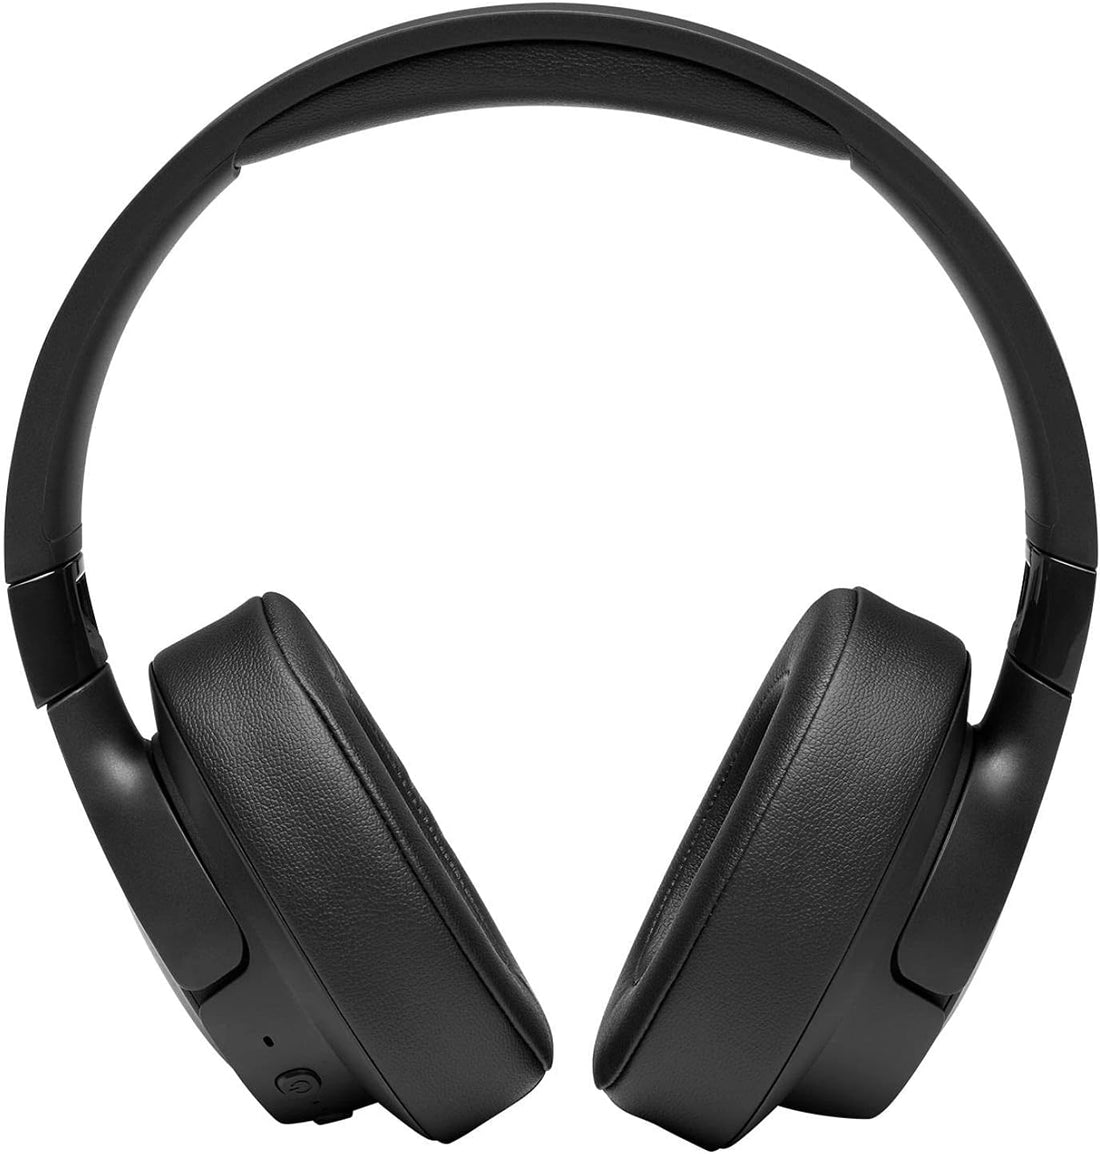 JBL TUNE 750BTNC Wireless Over-Ear Headphones with Noise Cancellation - Black (Certified Refurbished)